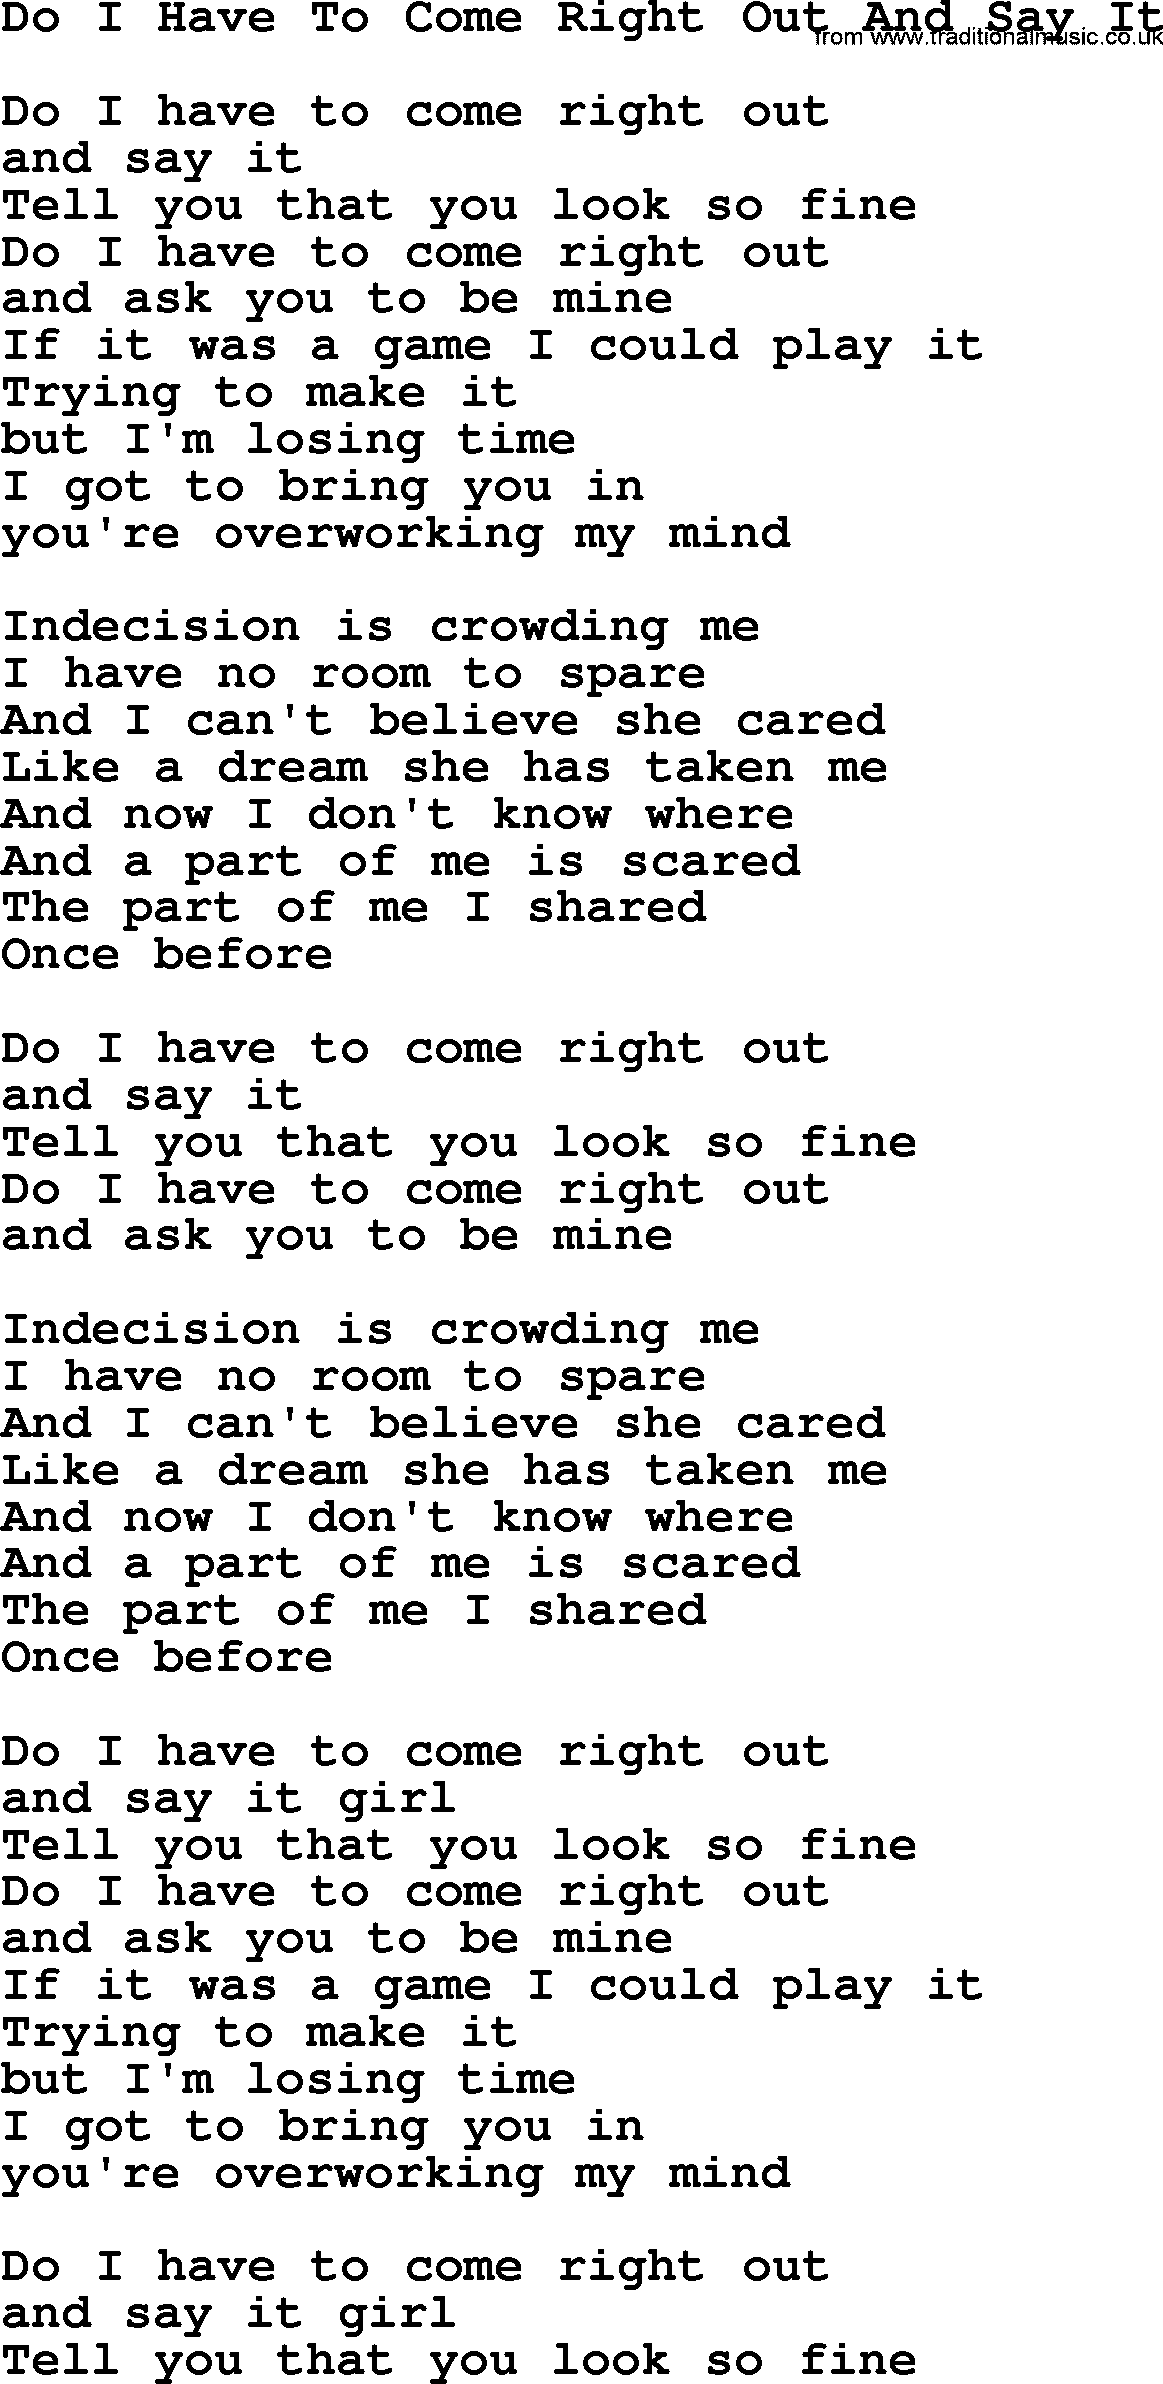 The Byrds song Do I Have To Come Right Out And Say It, lyrics